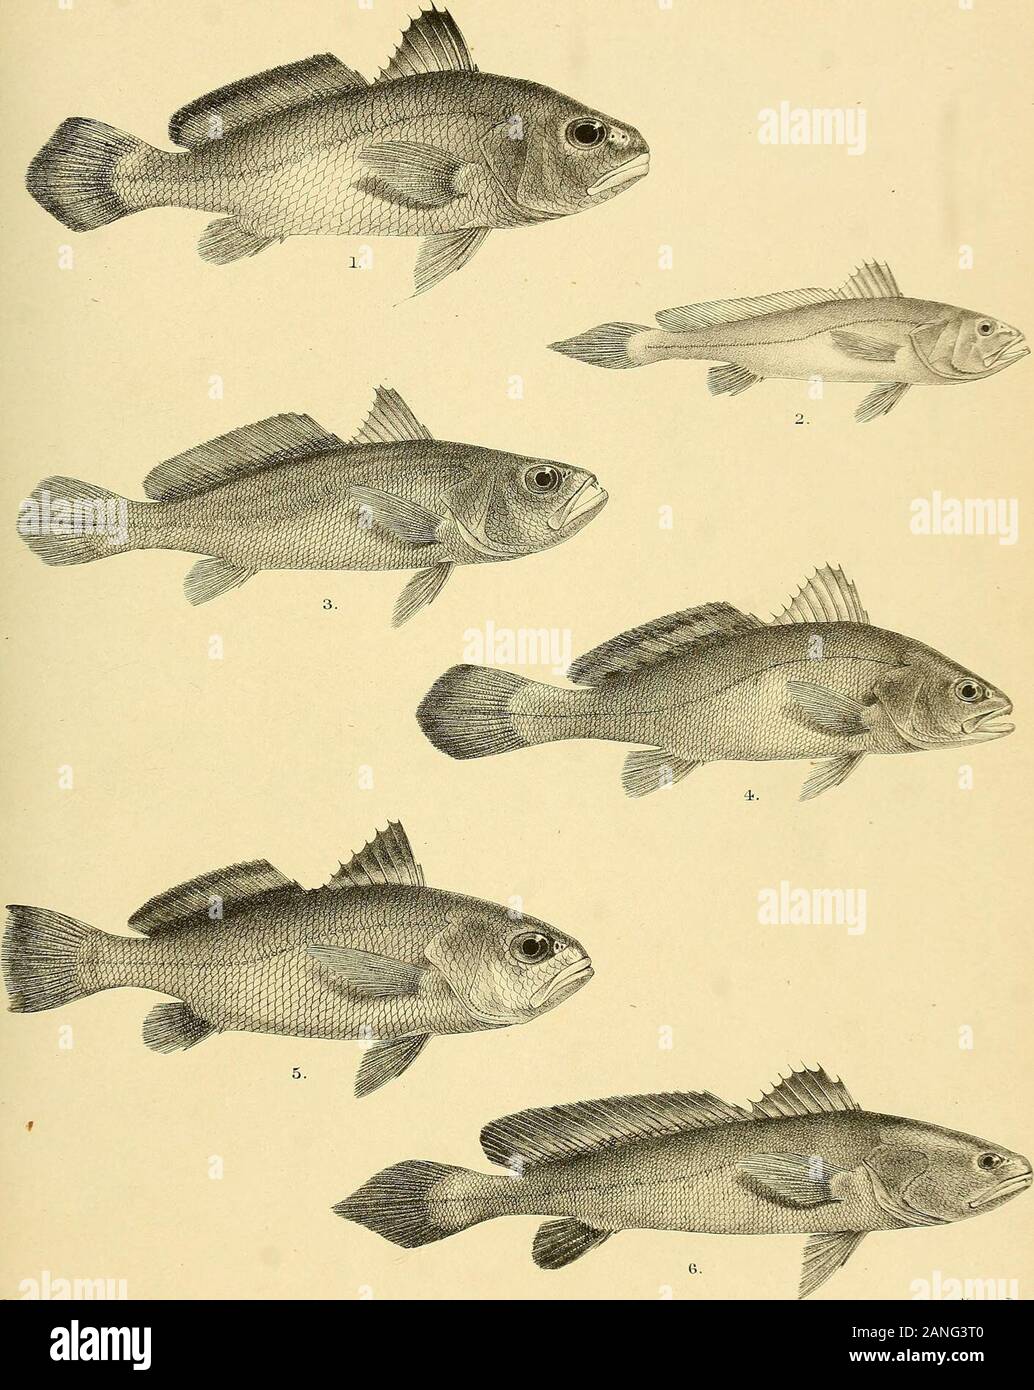 The fishes of India; being a natural history of the fishes known to inhabit the seas and fresh waters of India, Burma, and Ceylon . 8g iHForci del Suzini lith. 1. SCIJENA CARUTTA. ^tr-terr. nr c s - =nr . 2. S. SINA. 3. S. C01T0R. 4. &. 6. S. ALB1DA. 5. S BELENGERI. Days Fish.es of India. ?:=,-, ziv. C-H-Ford a»I B Mmterri lith ifint arr. 3r-os -mro 1 SCLENA VOGLERI. 2 SCLEN01DES MICRODON. 3. OTOLITHUS ARGENTEUS. 4. SCLENA BLEEKERI. 5 S ANEUS.. 6. SCLENOIDES BRUNNEUS. Days Fishes of India. Stock Photo